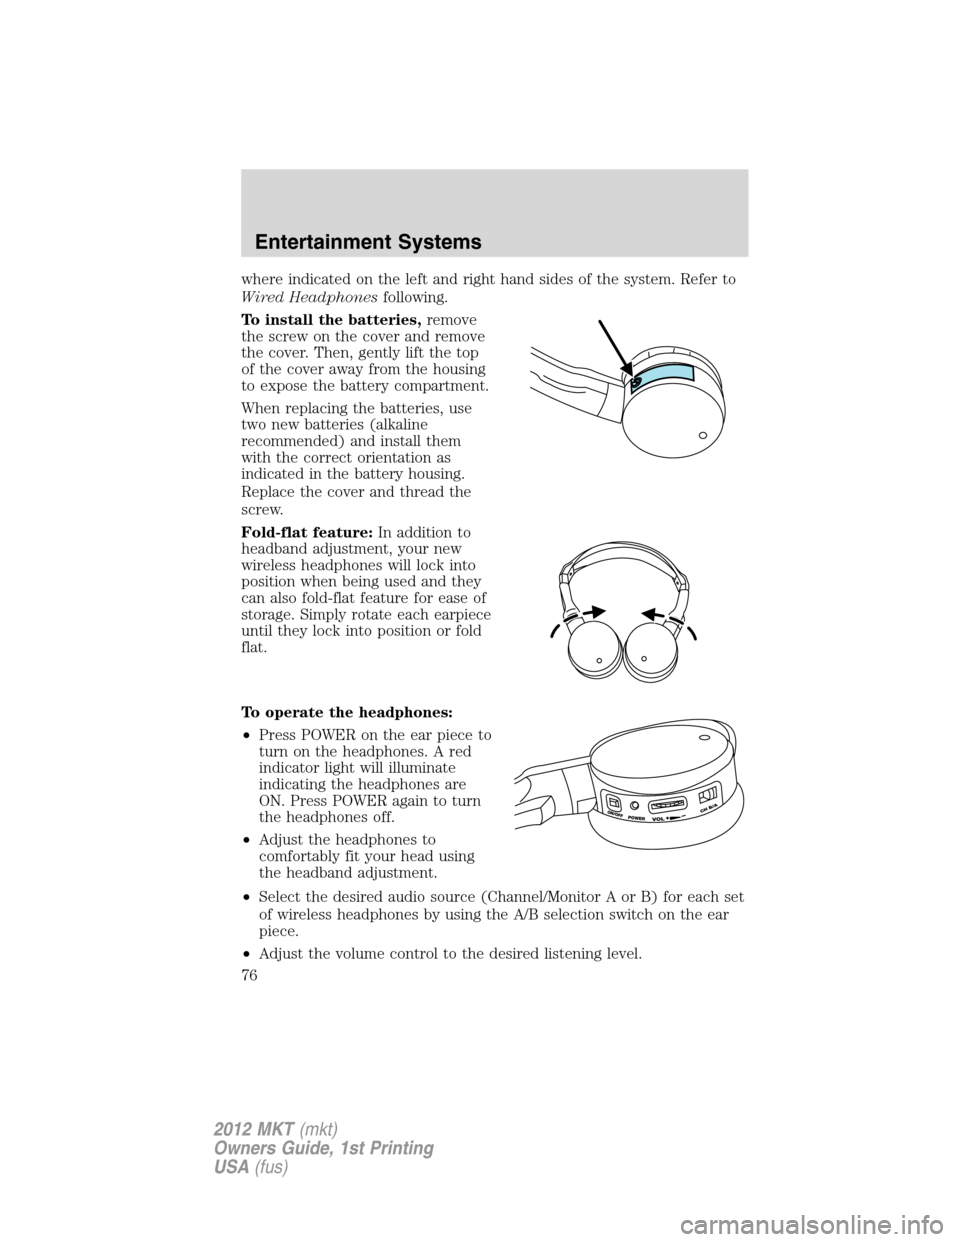 LINCOLN MKT 2012  Owners Manual where indicated on the left and right hand sides of the system. Refer to
Wired Headphonesfollowing.
To install the batteries,remove
the screw on the cover and remove
the cover. Then, gently lift the t